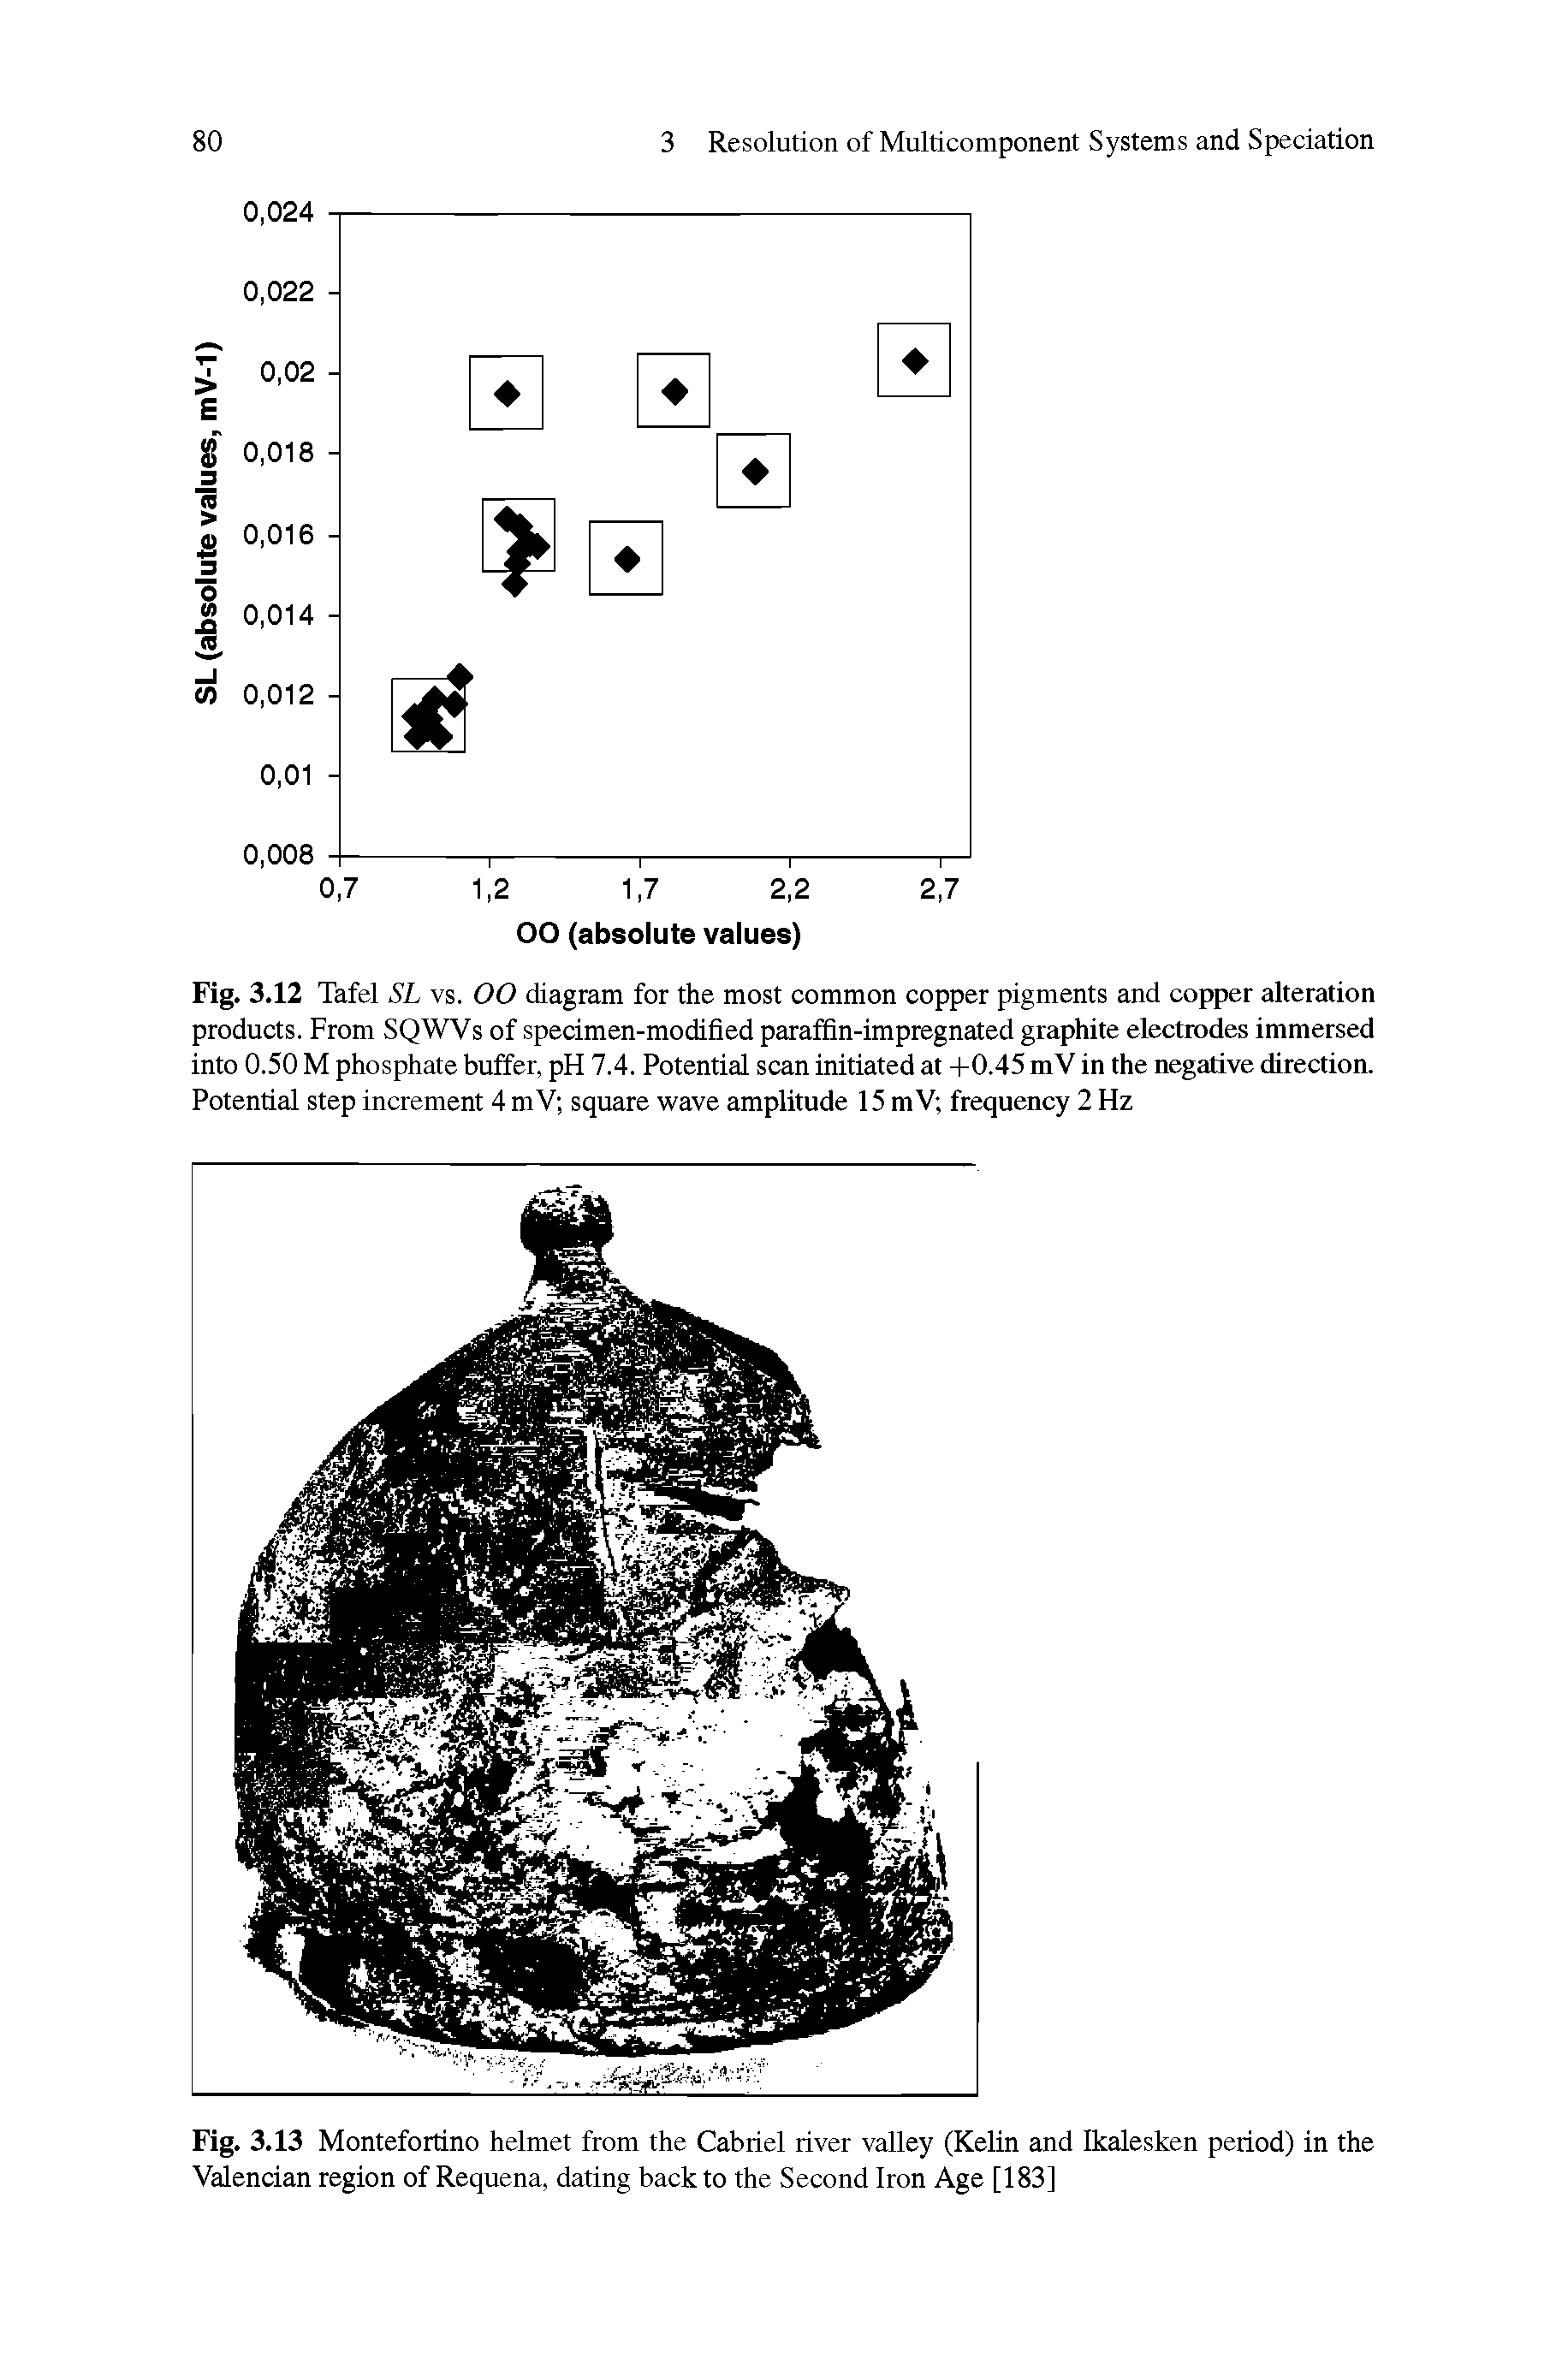 Fig. 3.12 Tafel SL vs. 00 diagram for the most common copper pigments and copper alteration products. From SQWVs of specimen-modified paraffin-impregnated graphite electrodes immersed into 0.50 M phosphate buffer, pH 7.4. Potential scan initiated at -1-0.45 mV in the negative direction. Potential step increment 4 mV square wave amplitude 15 mV frequency 2 Hz...